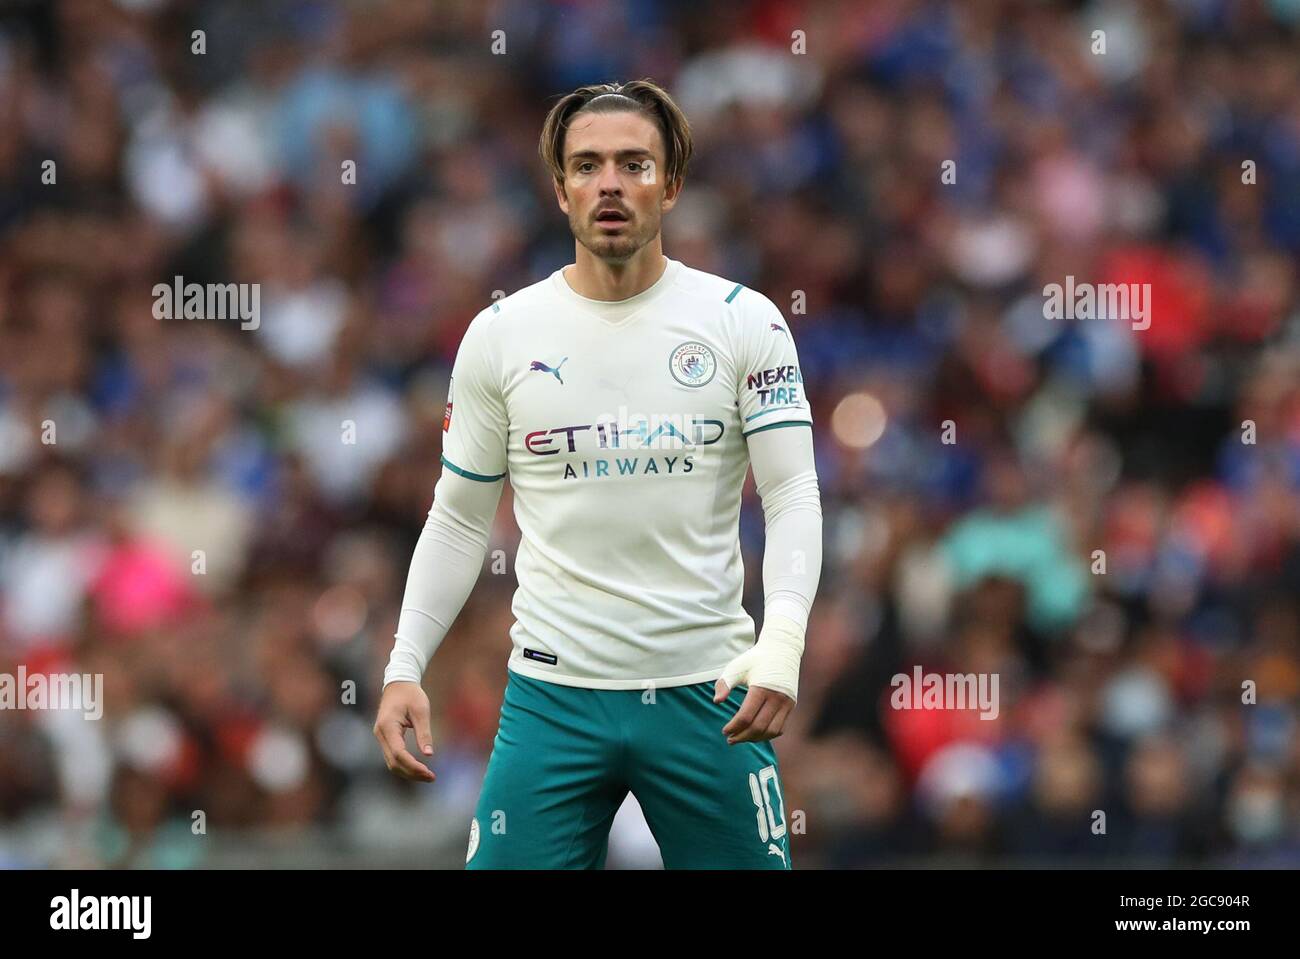 Soccer Football - FA Community Shield - Leicester City v Manchester City - Wembley Stadium, London, Britain - August 7, 2021  Manchester City's Jack Grealish in action Action Images via Reuters/Peter Cziborra Stock Photo